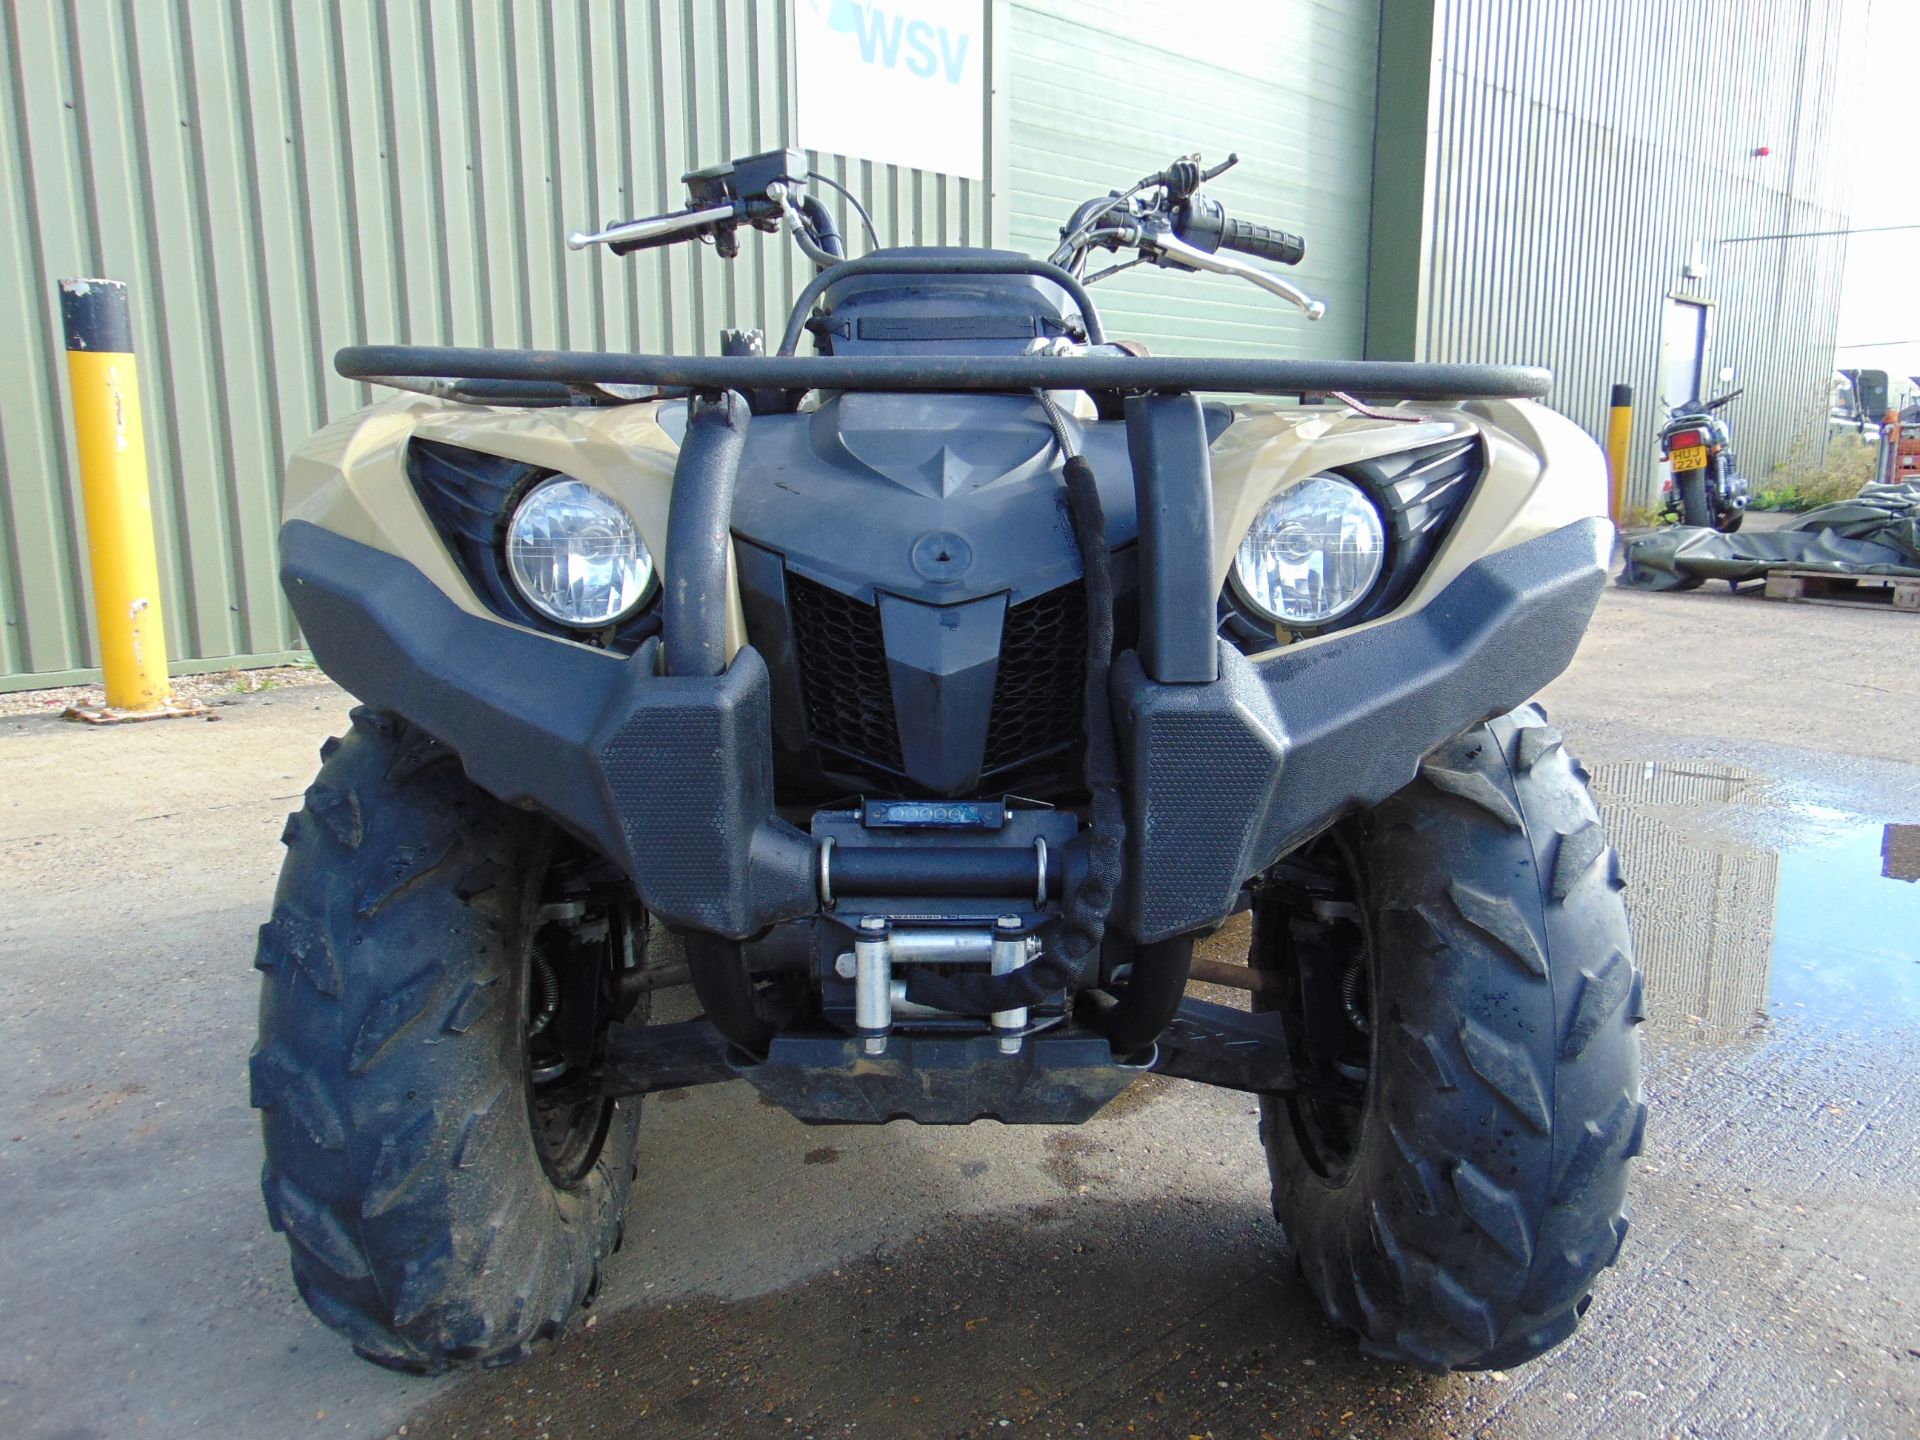 Military Specification Yamaha Grizzly 450 4 x 4 ATV Quad Bike ONLY 214 HOURS!!! - Image 17 of 22